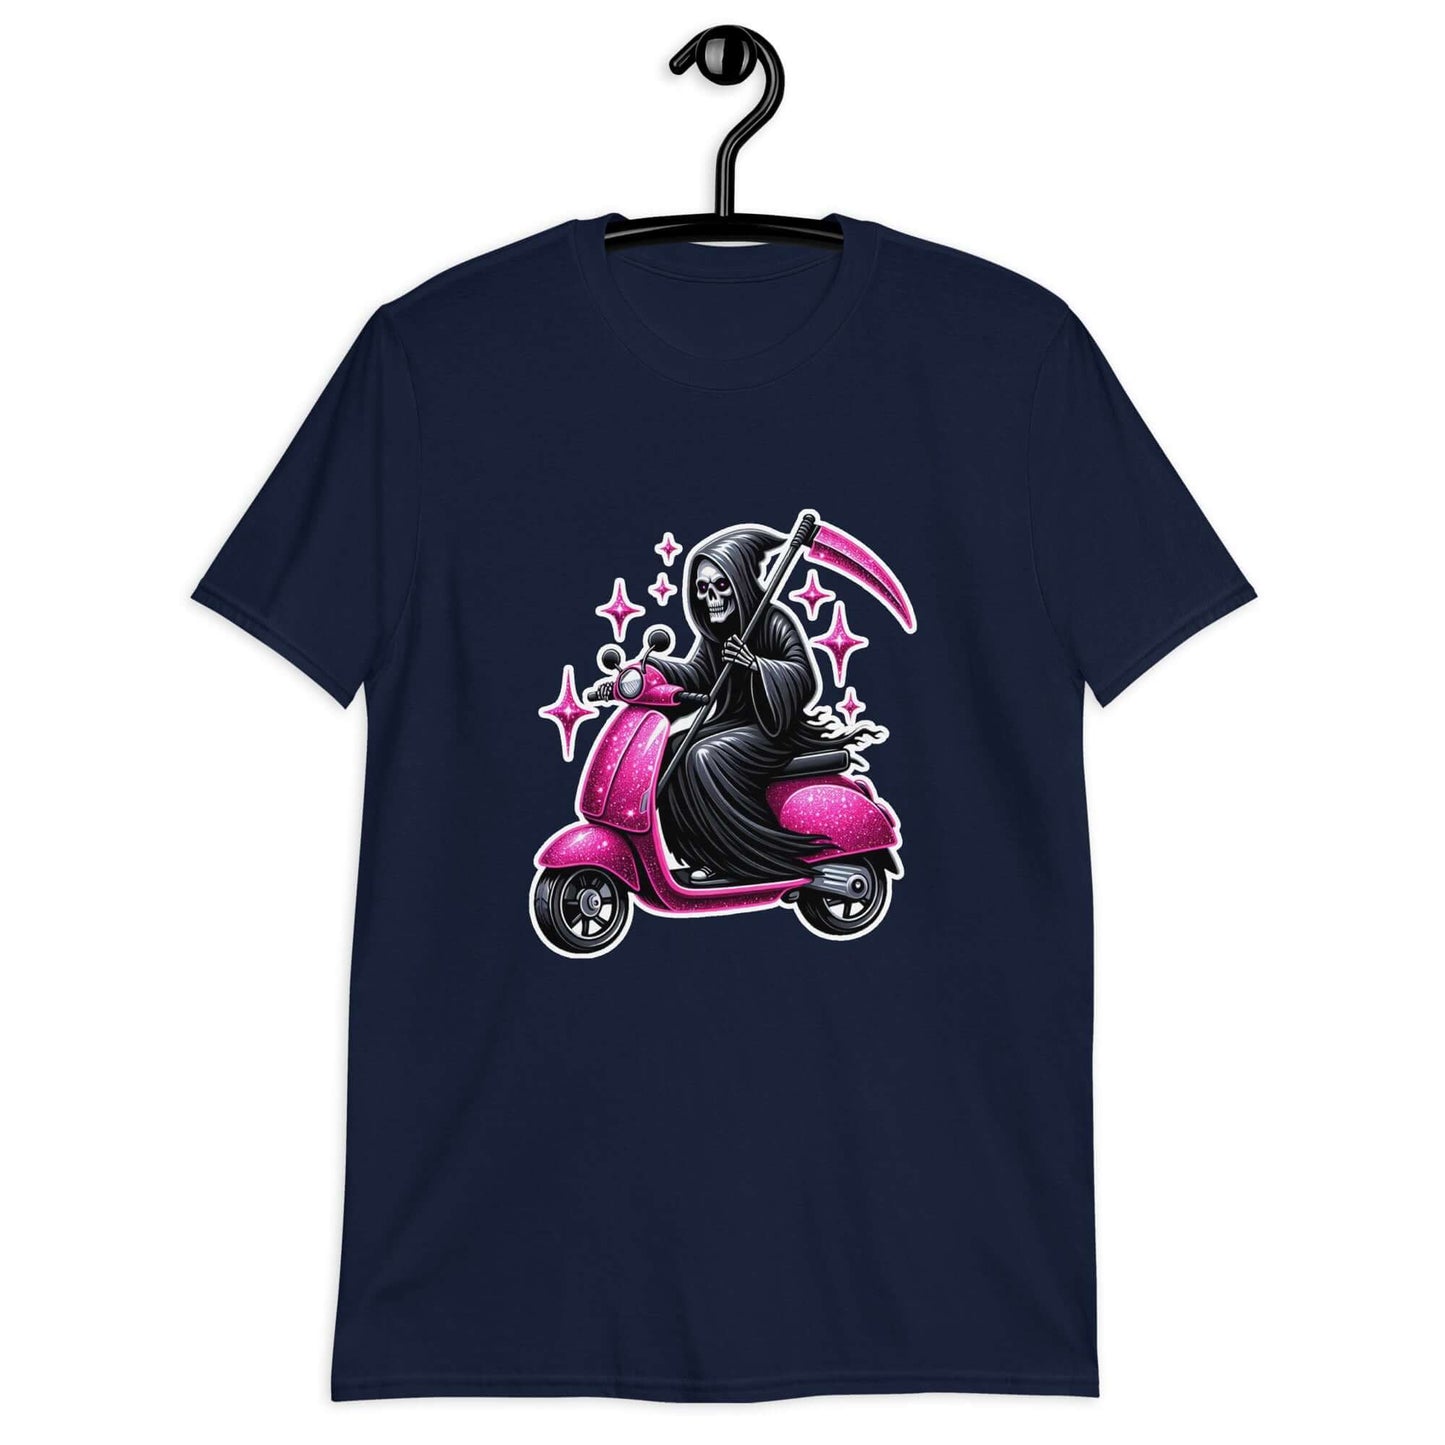 Navy blue t-shirt with an image of the Grim Reaper riding on a glam pink scooter printed on the front.